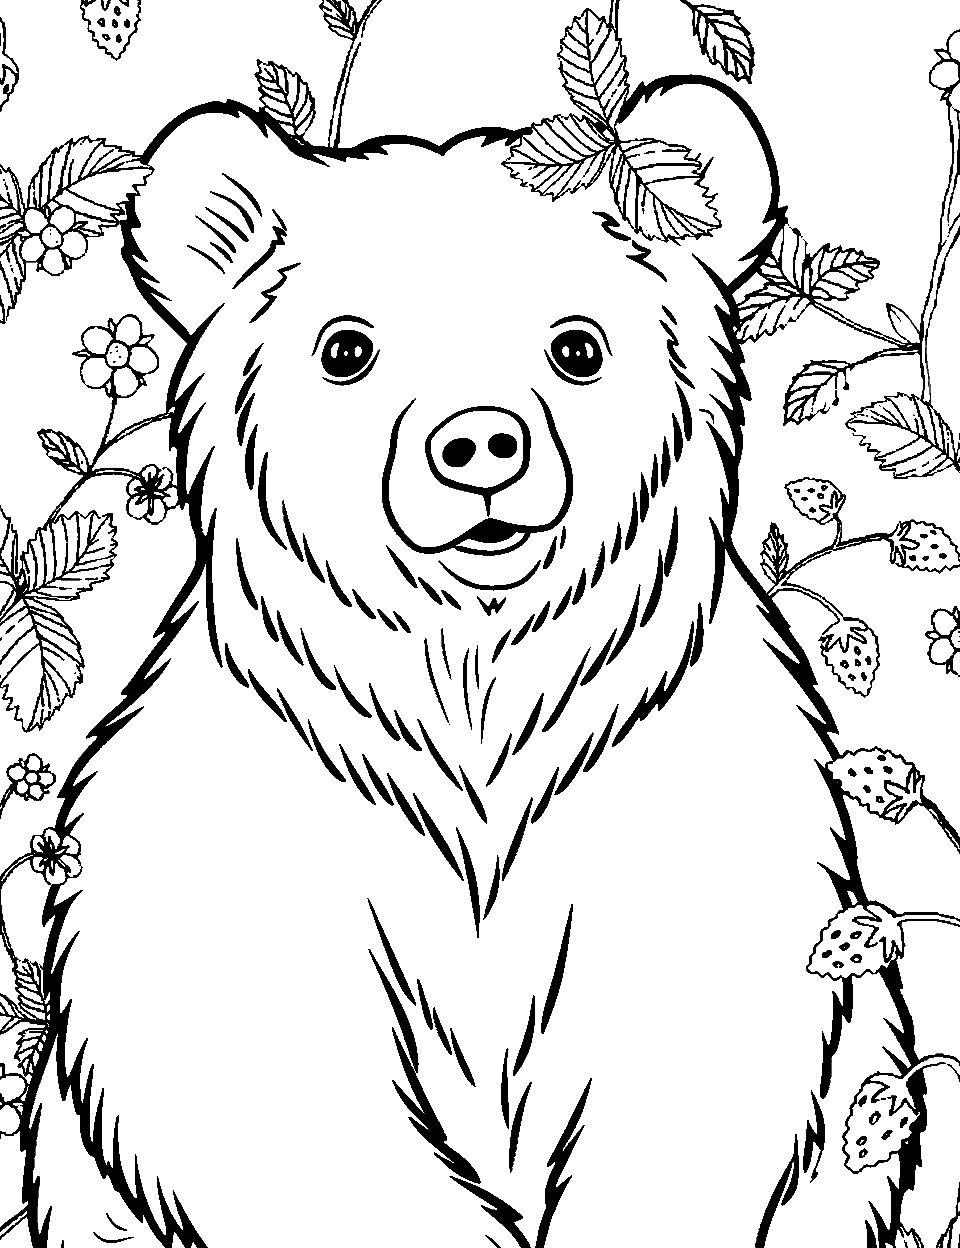 Strawberry Scent Coloring Page - Bear surrounded by strawberry plants.